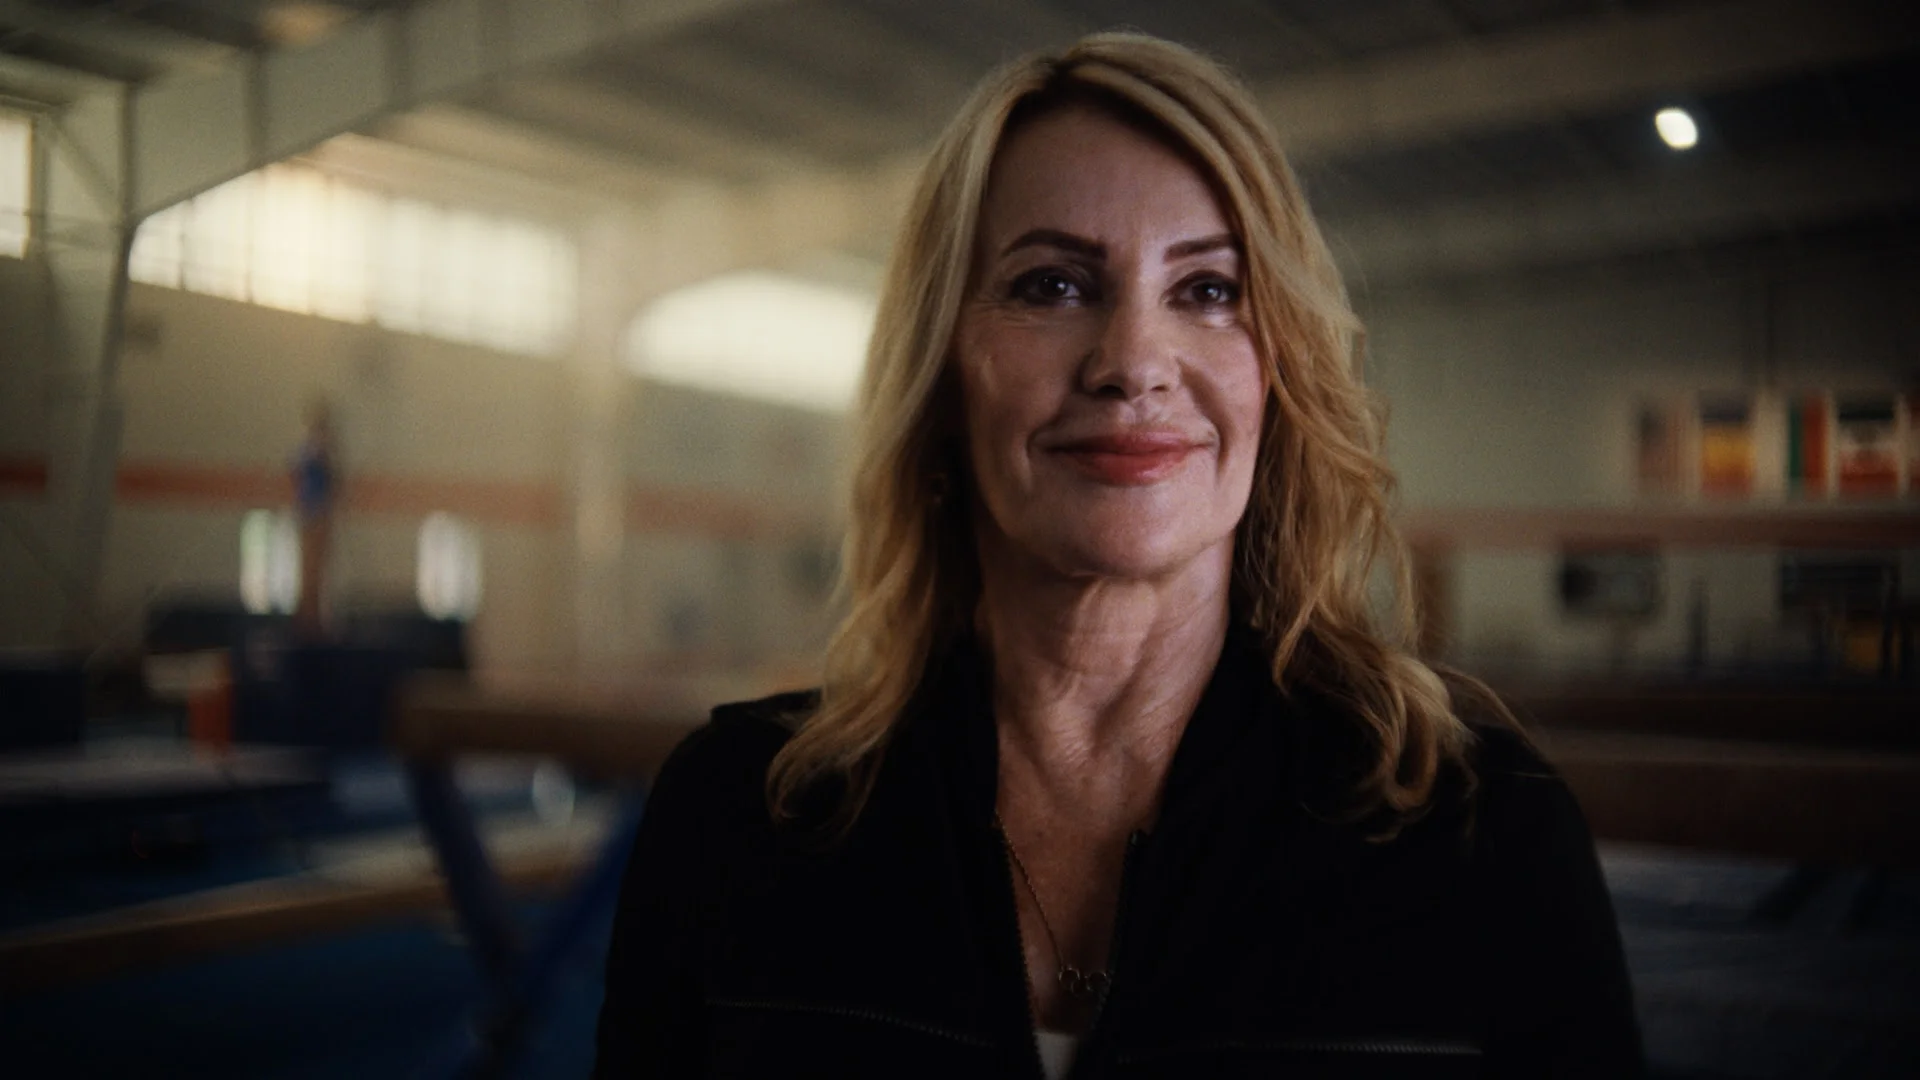 Smiling woman with blonde hair in a gymnasium background